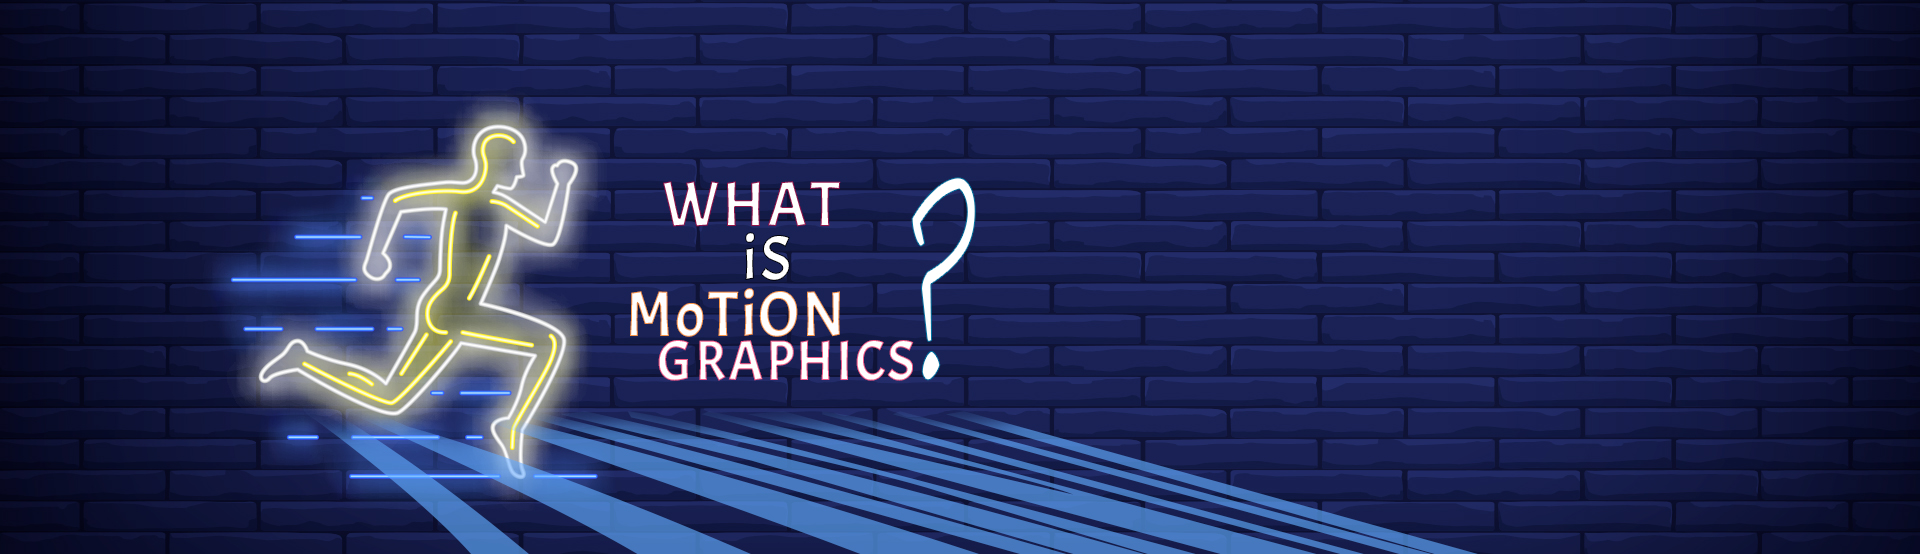 What Is Motion Graphics?